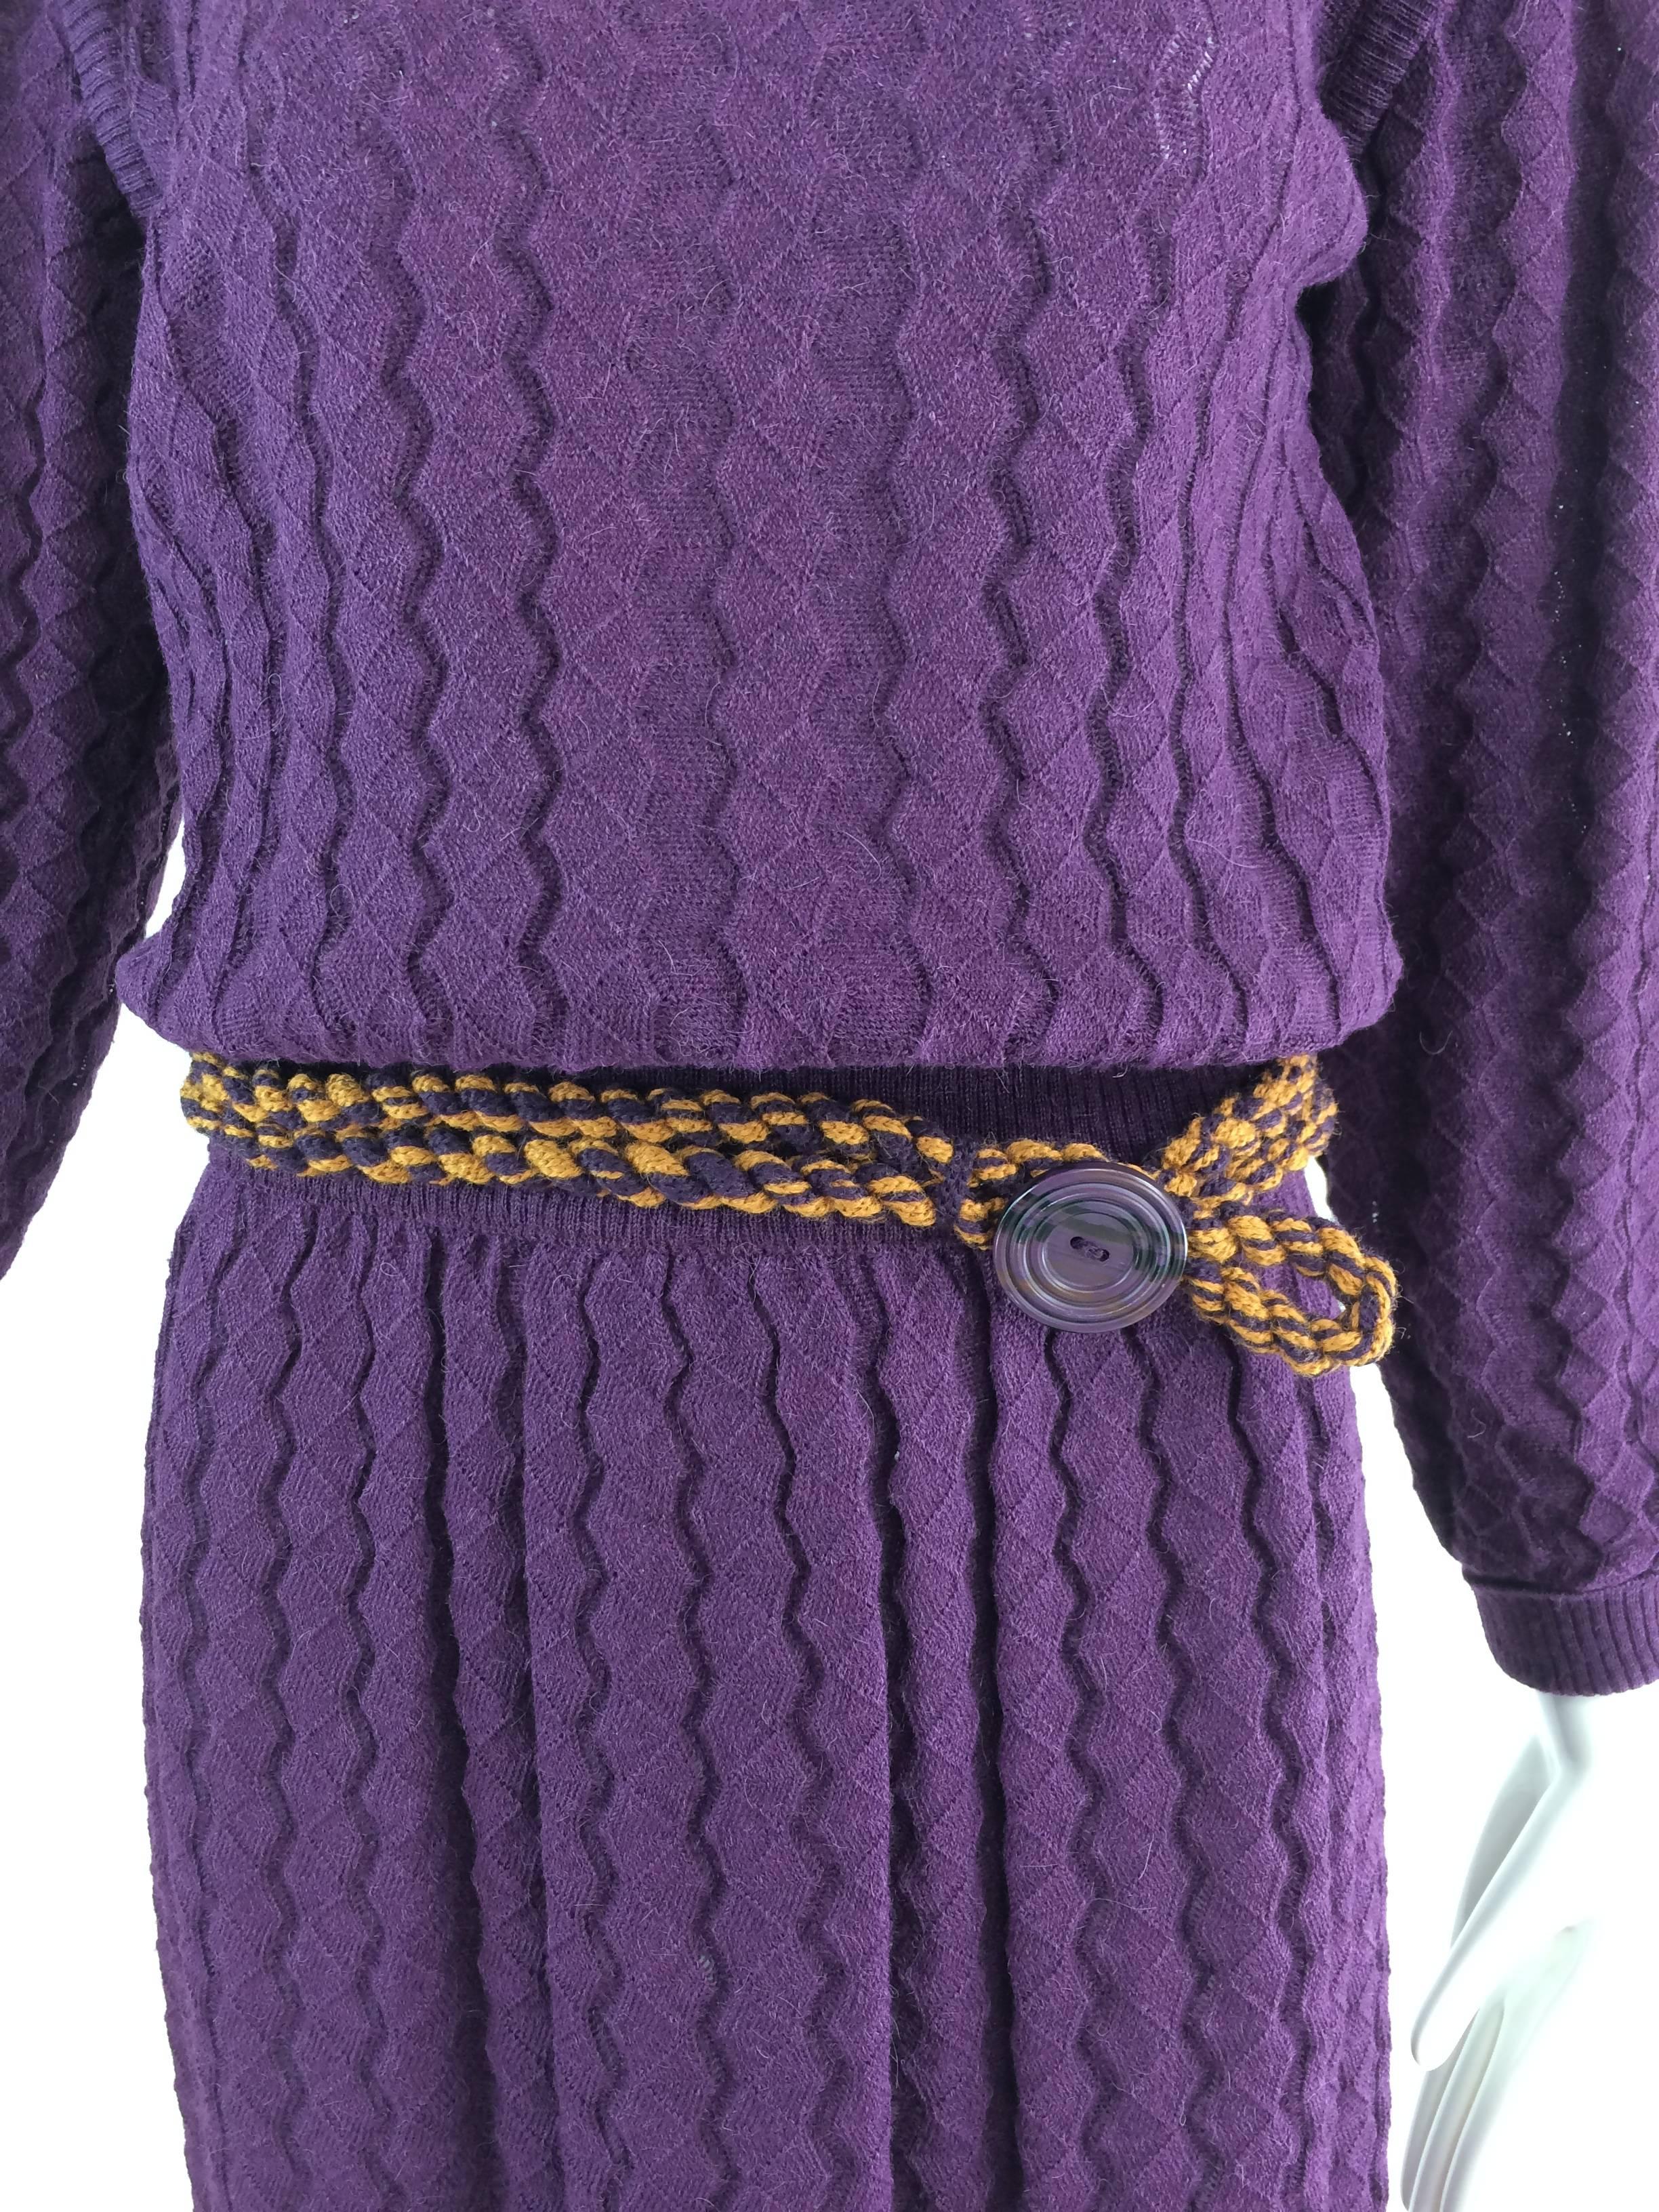 Missoni plum cable knit long sleeve dress & braided belt...Cable knit alpaca in a sort of honey comb pattern, this dress is soft...Pull on style with ribbed neckline, and ribbed shoulder bands, long sleeves with ribbed cuffs...The dress has a cased